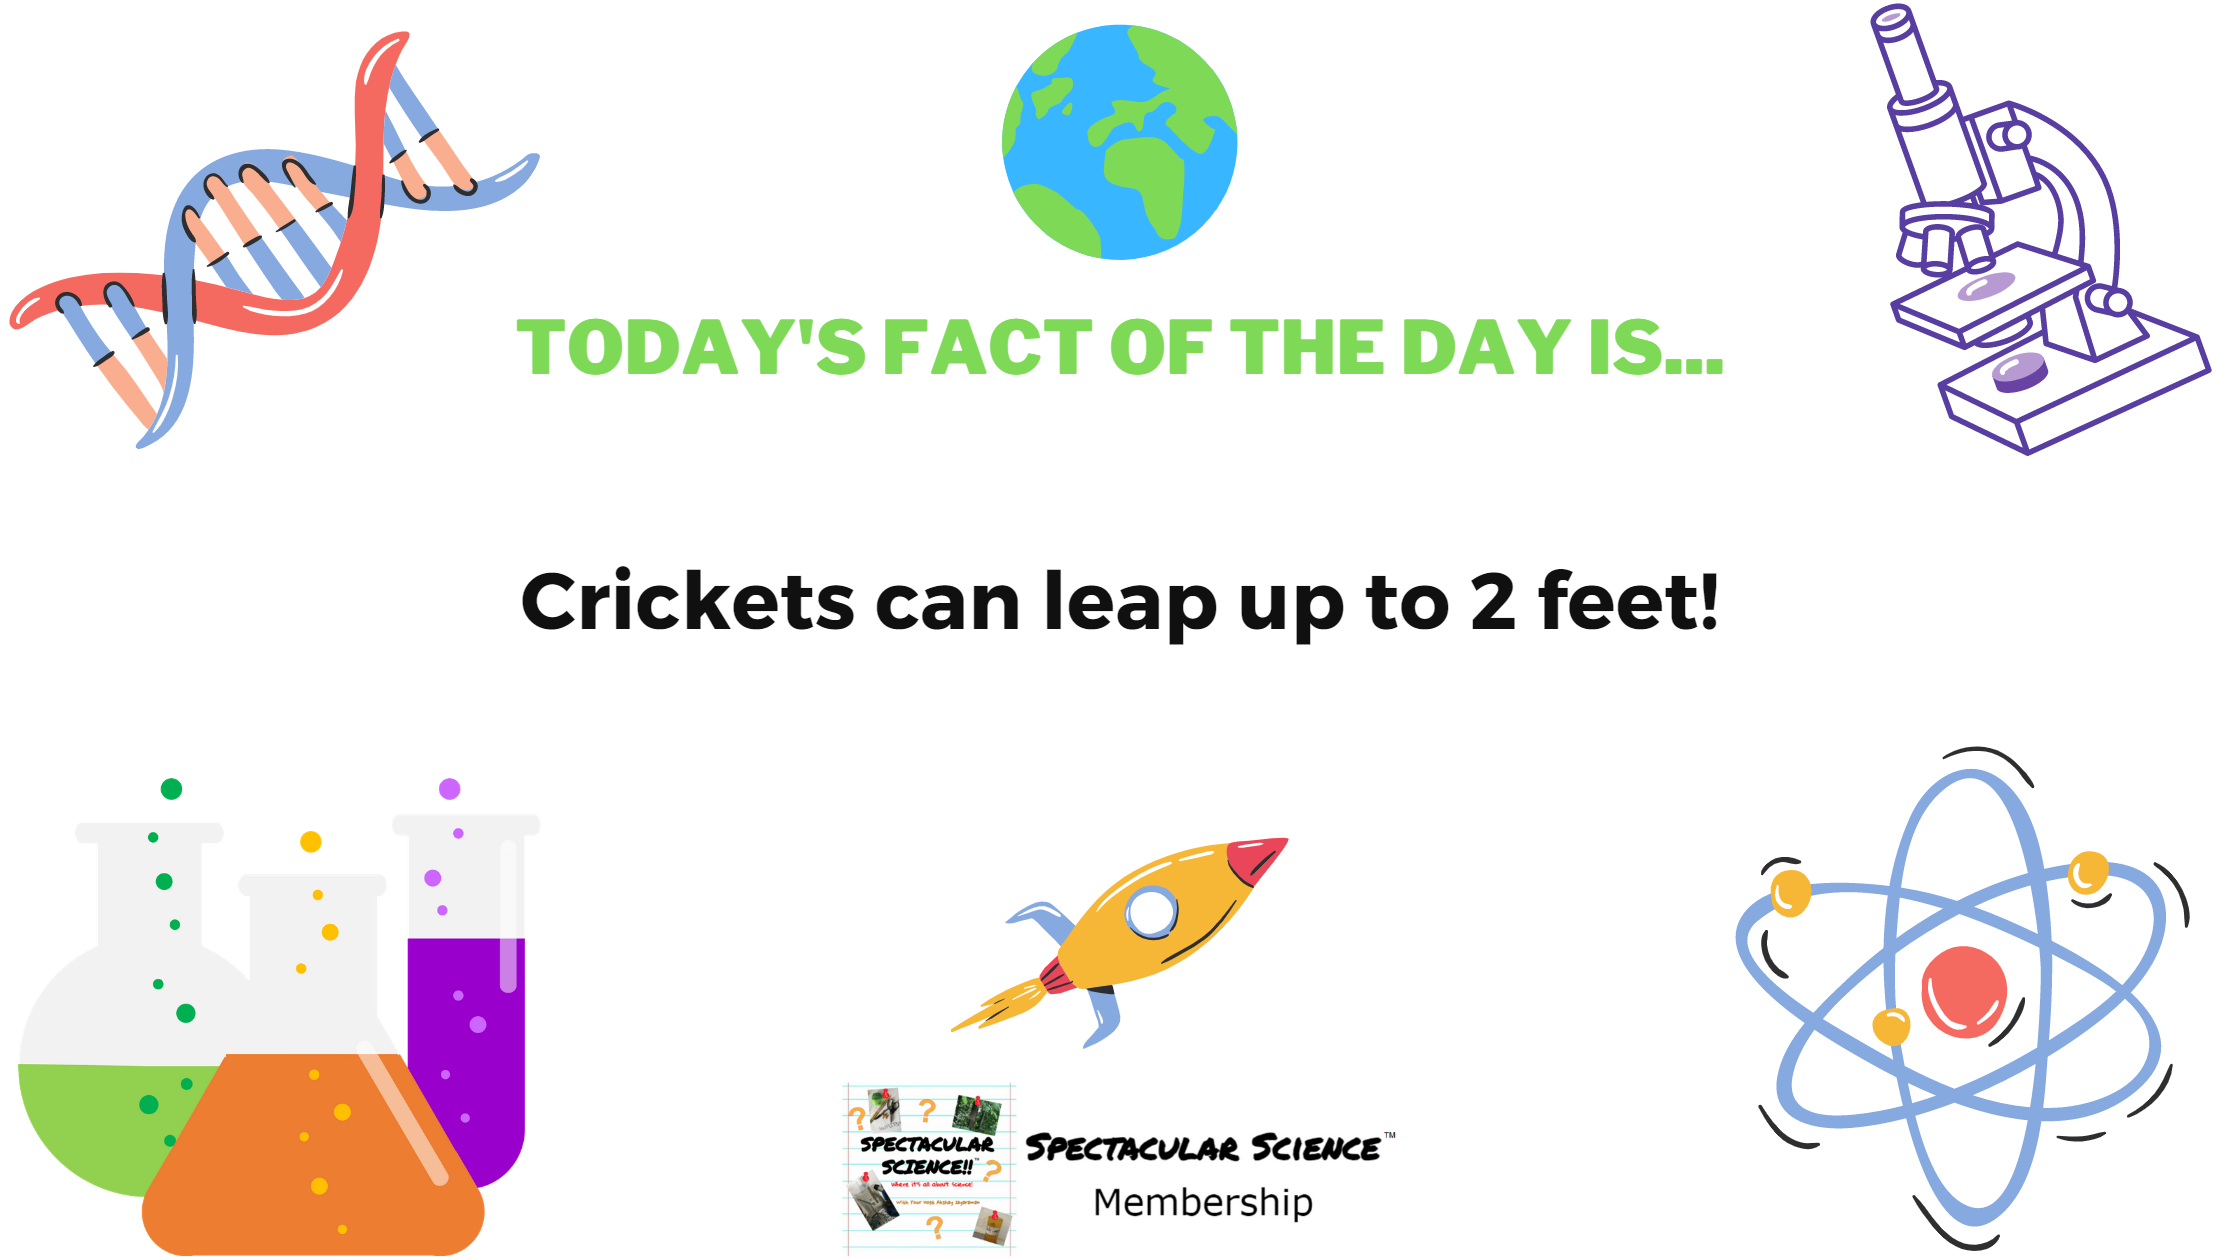 Fact of the Day Image January 14th